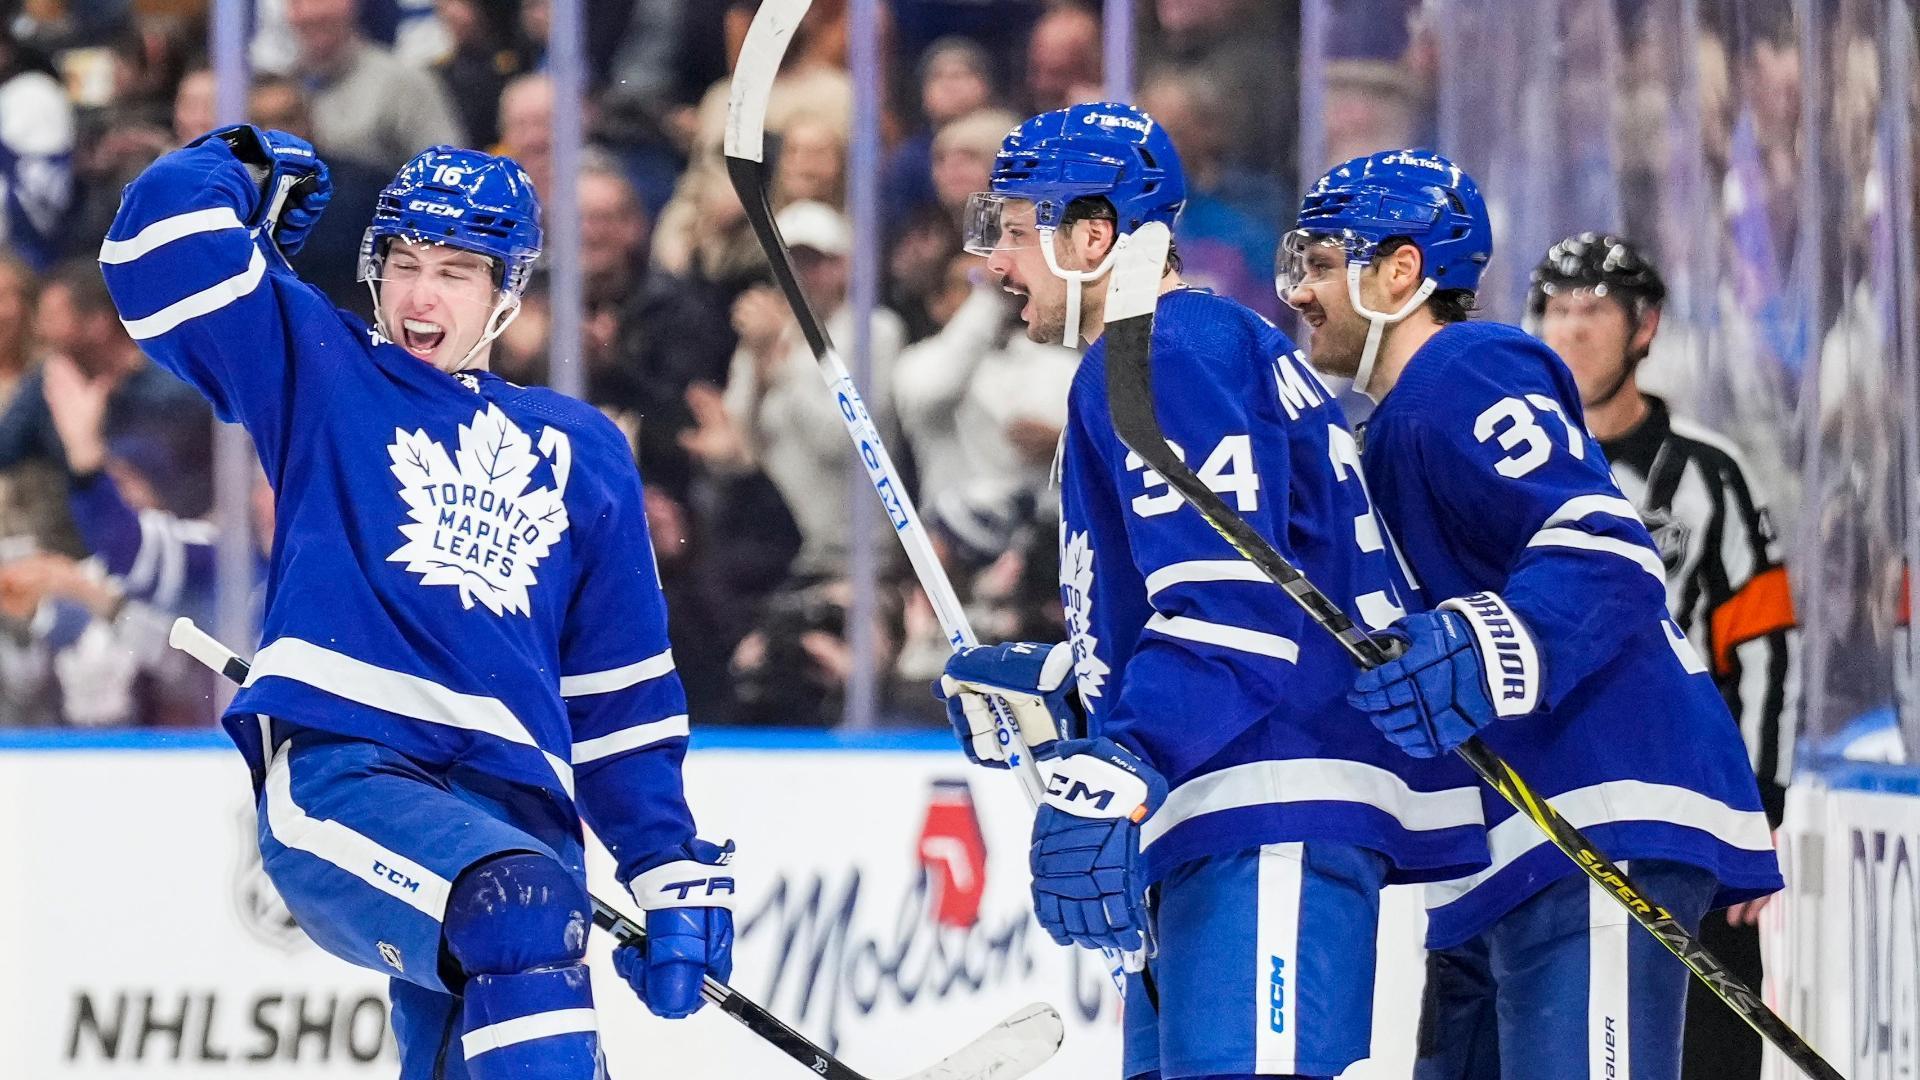 Marner scores quickly in OT to lift Maple Leafs over Rangers